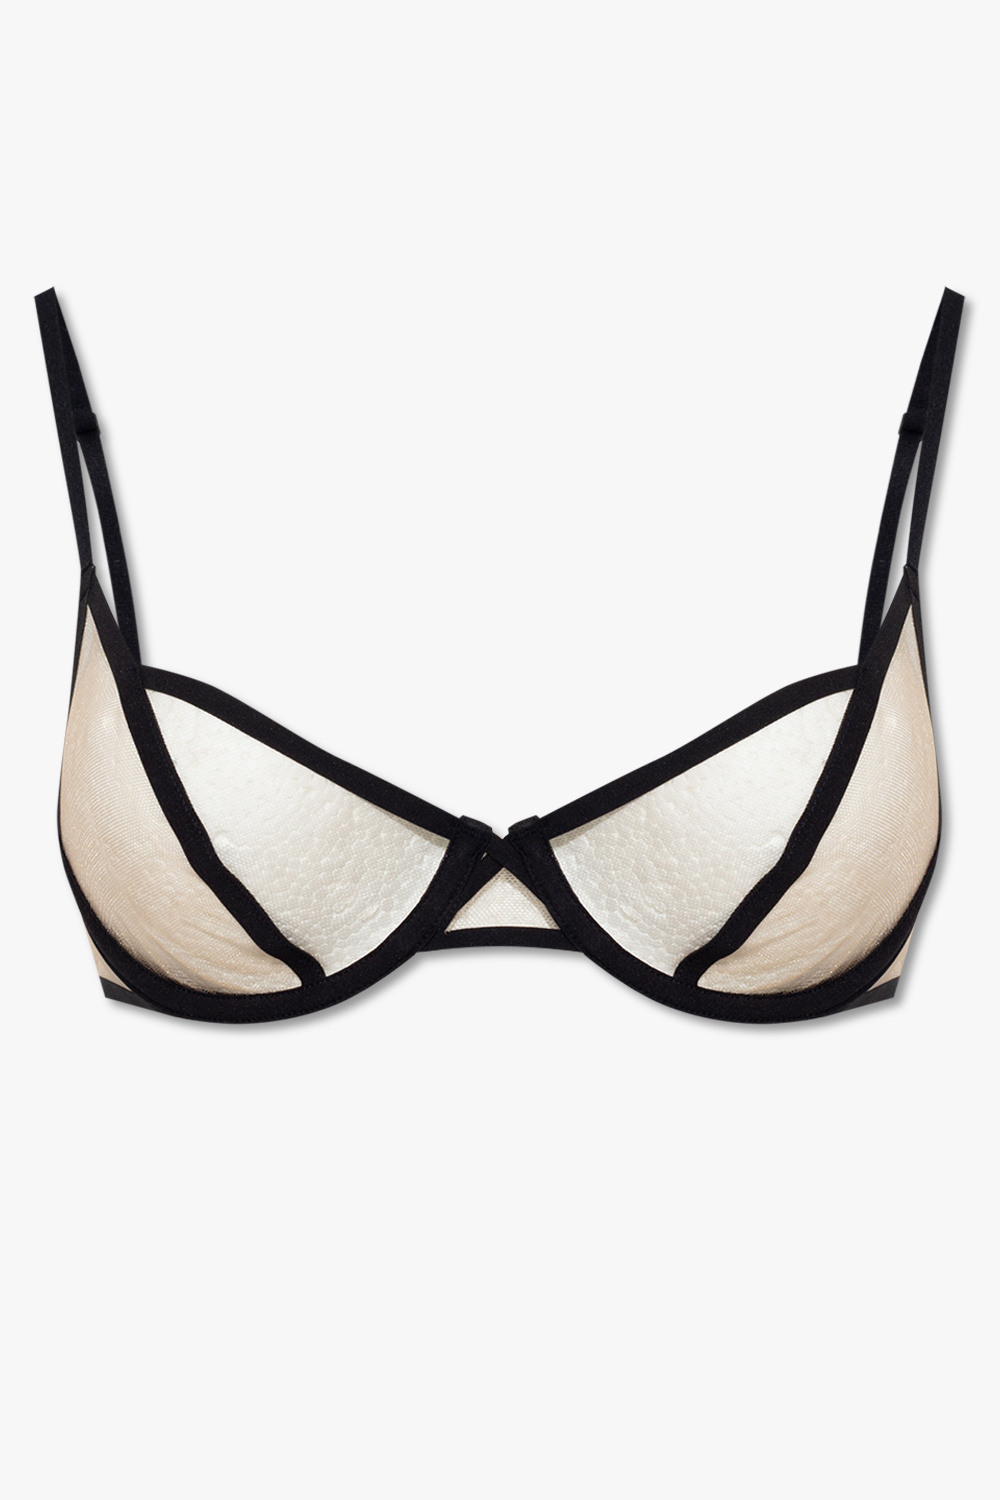 LIVY - Lingerie is the new jewel.